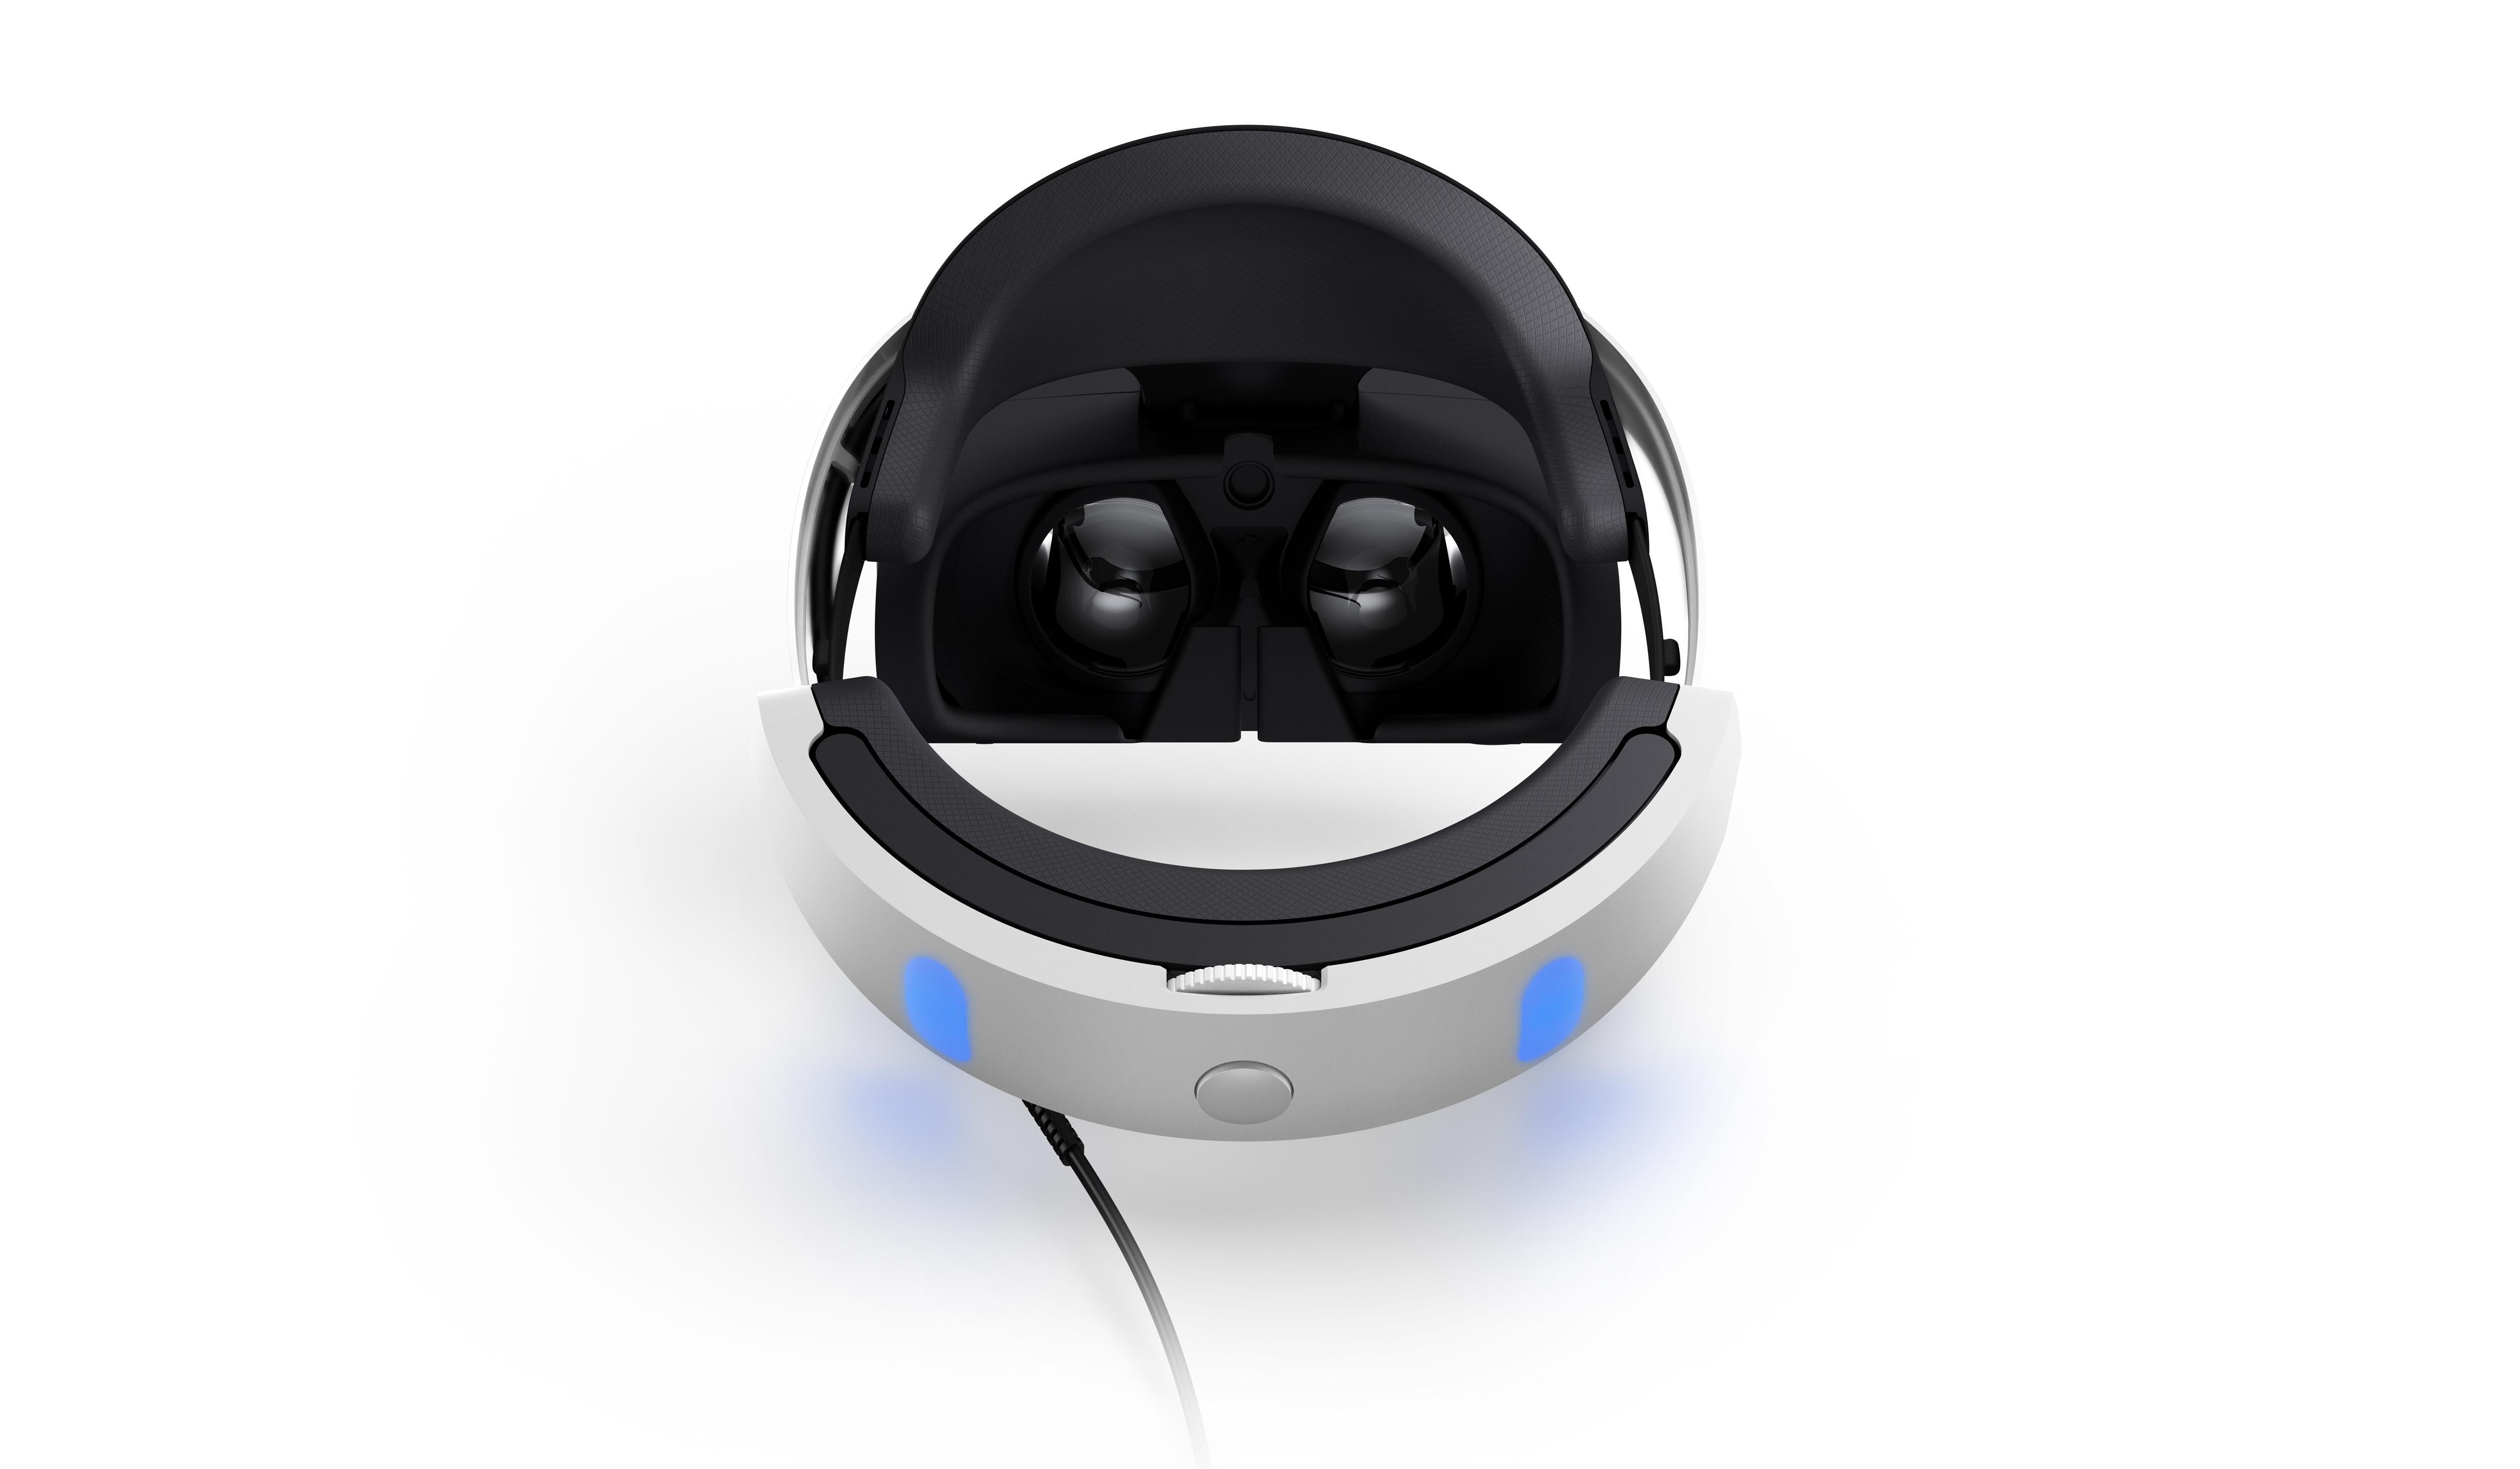 cleaning the playstation vr